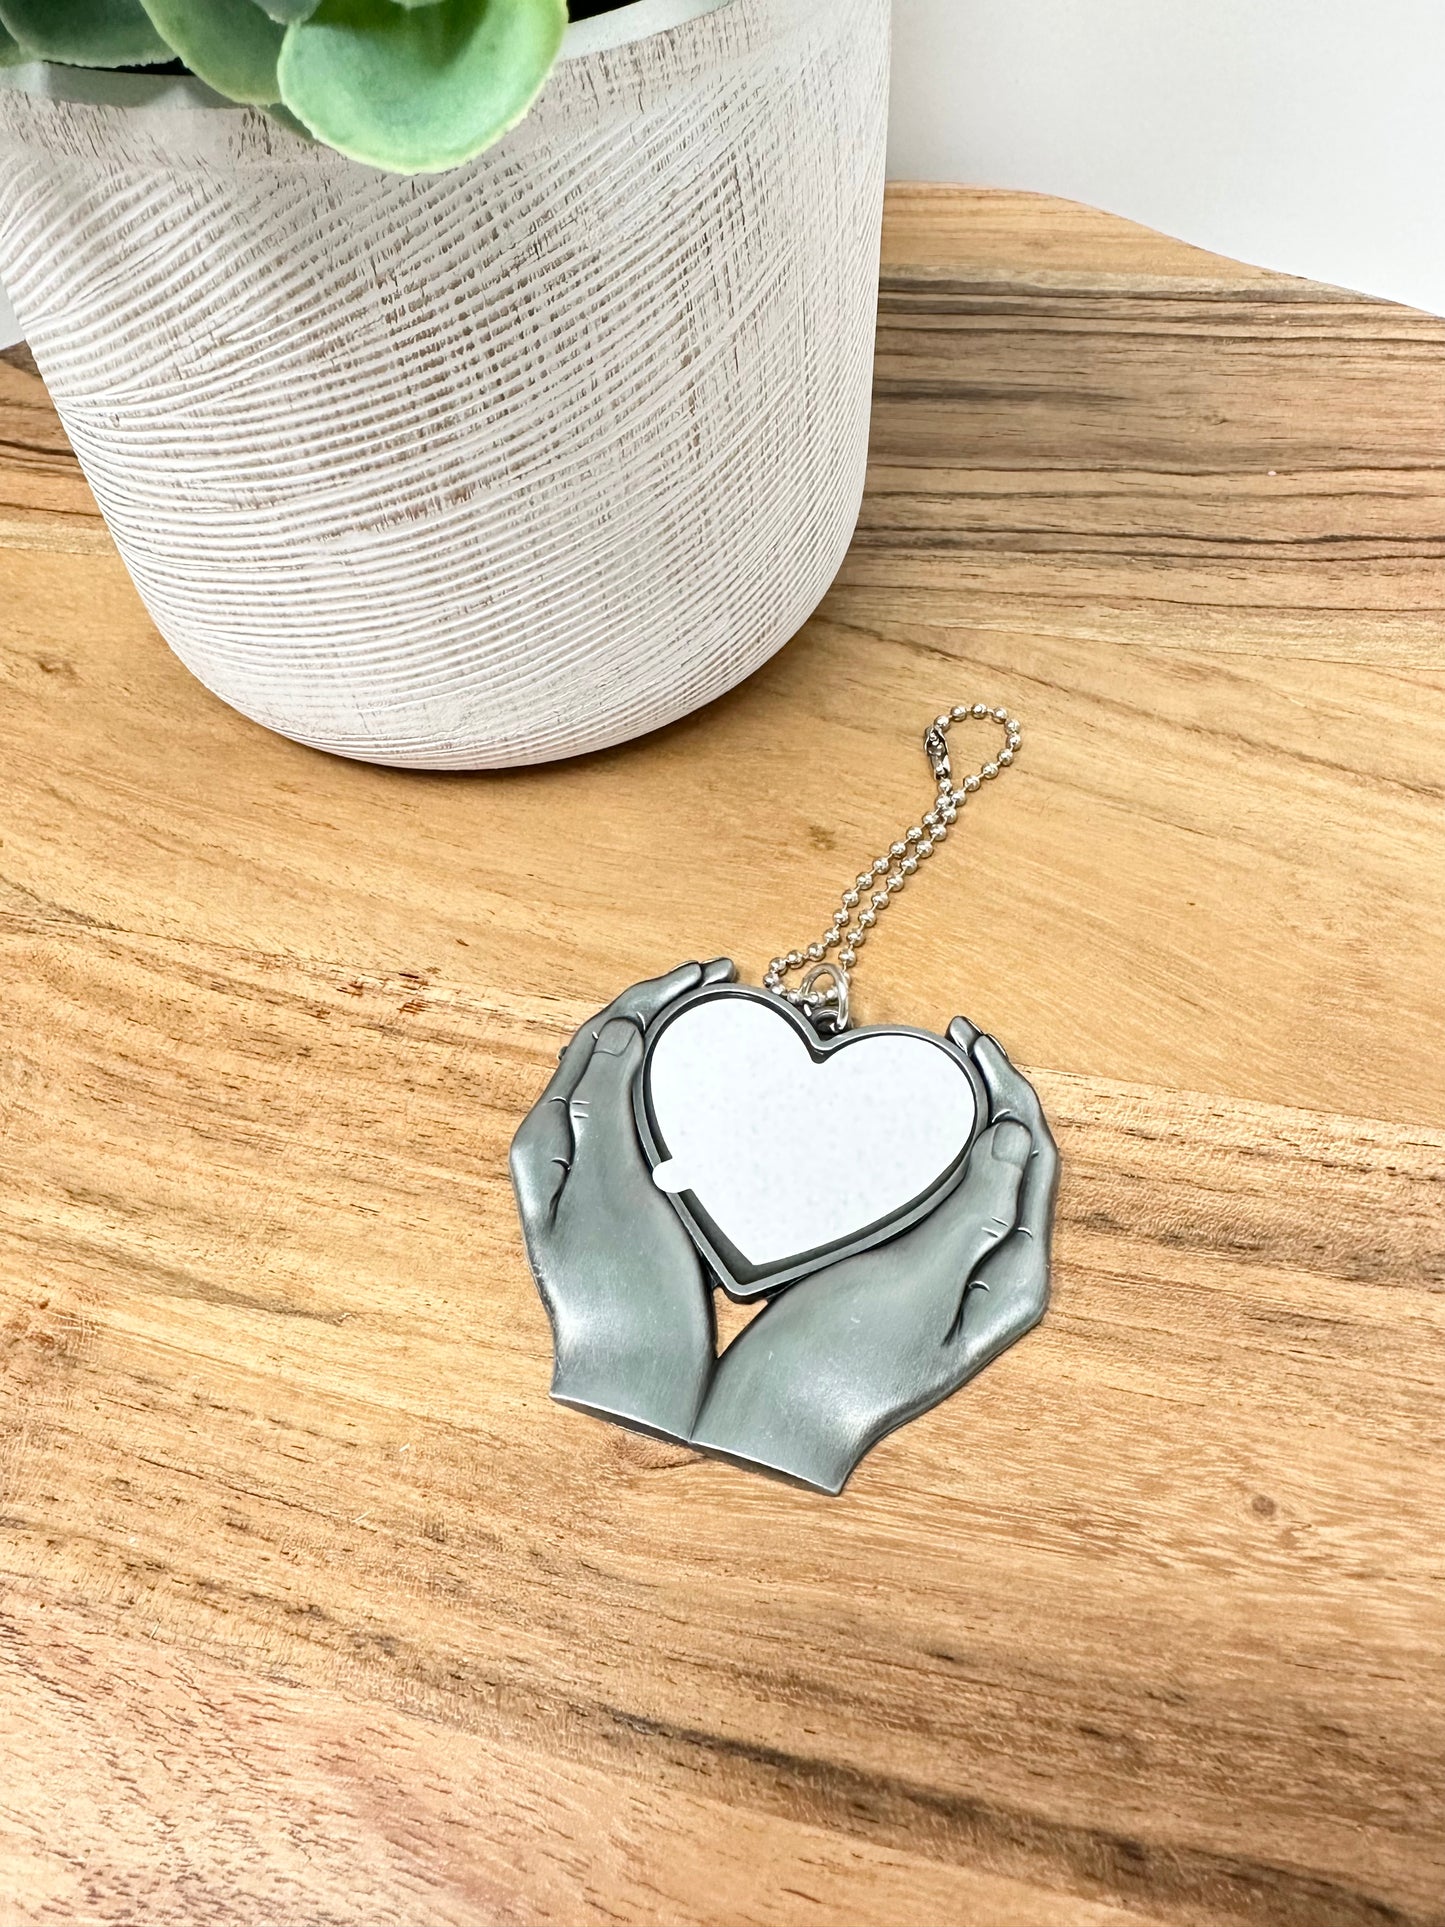 Hands Holding Heart Hanging Photo Charm